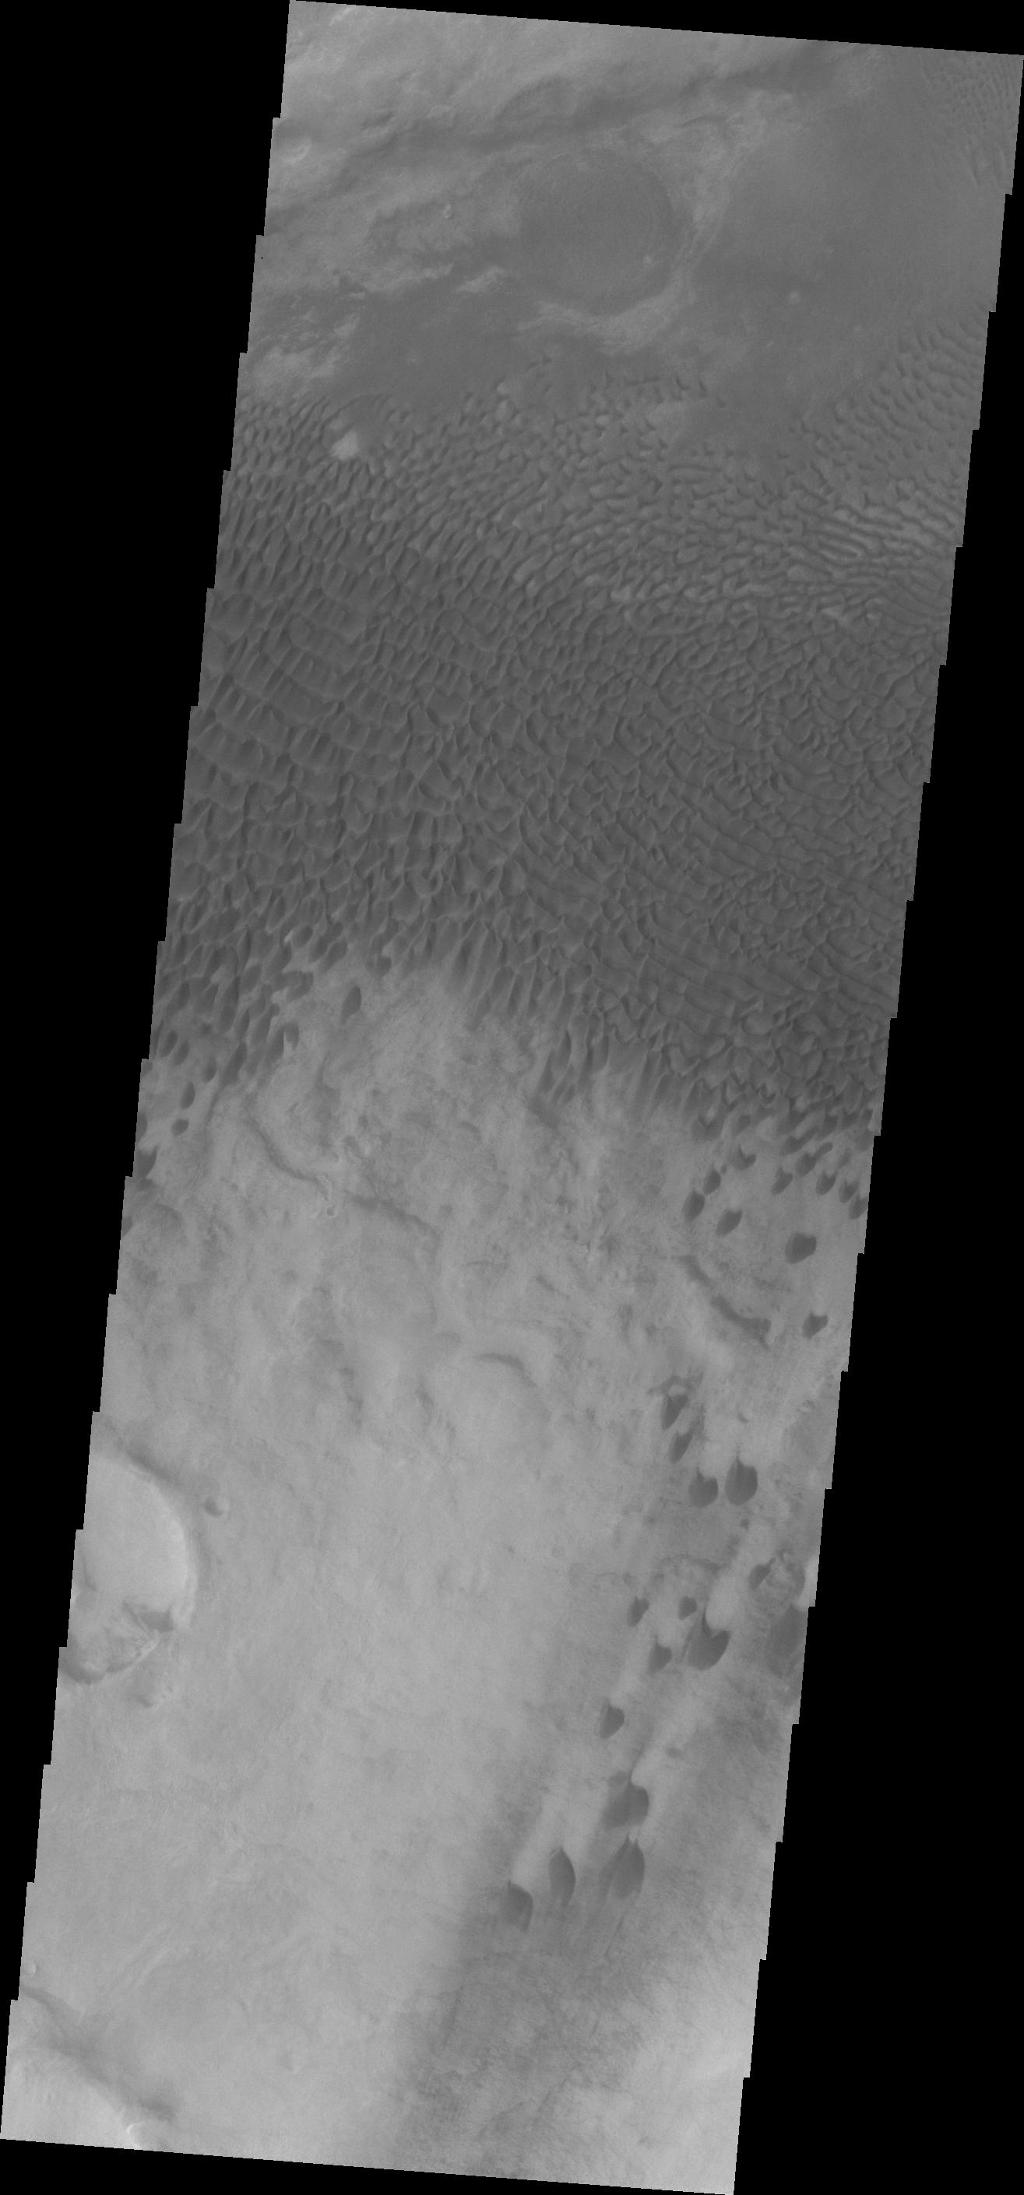 The dunes in this VIS image are located in Aonia Terra.